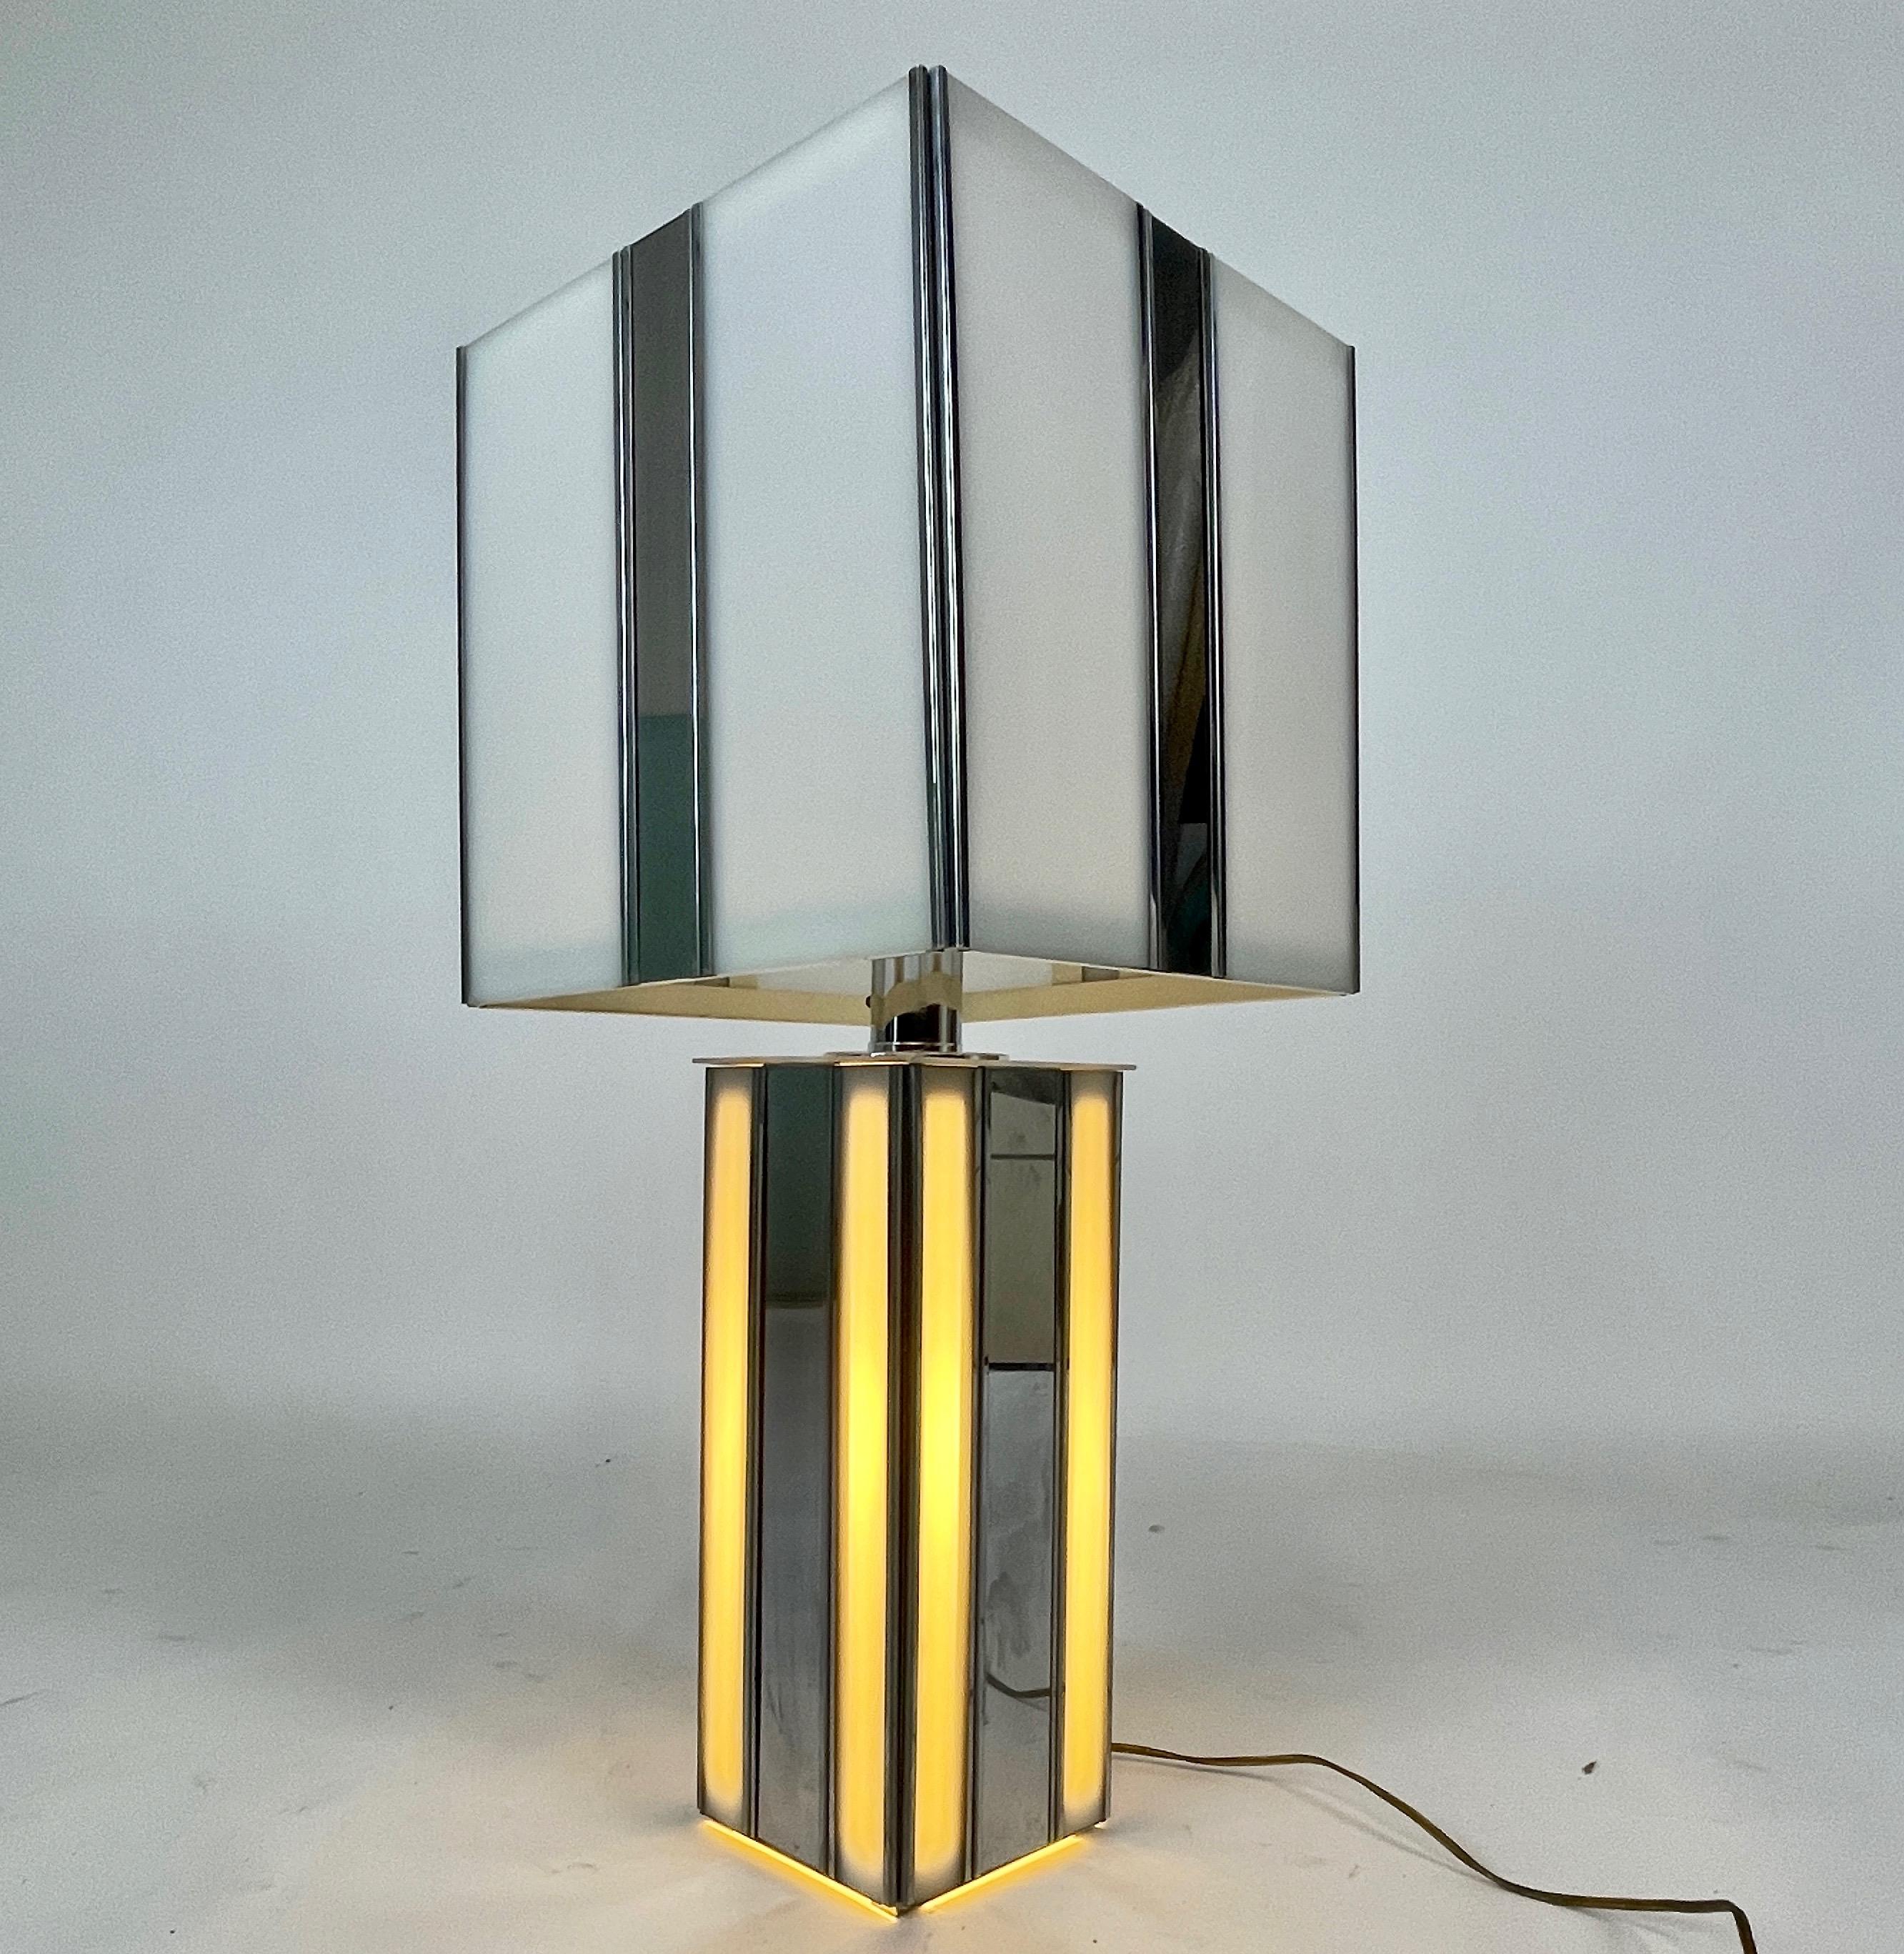 Incredible 1970s lamp made of chrome and plexiglass with a two way switch for lamp and illuminating base. The shade consists of chrome strips and alternating lucite panels .Lamp has a very chic look.
Plexi is white - The First photo shows a